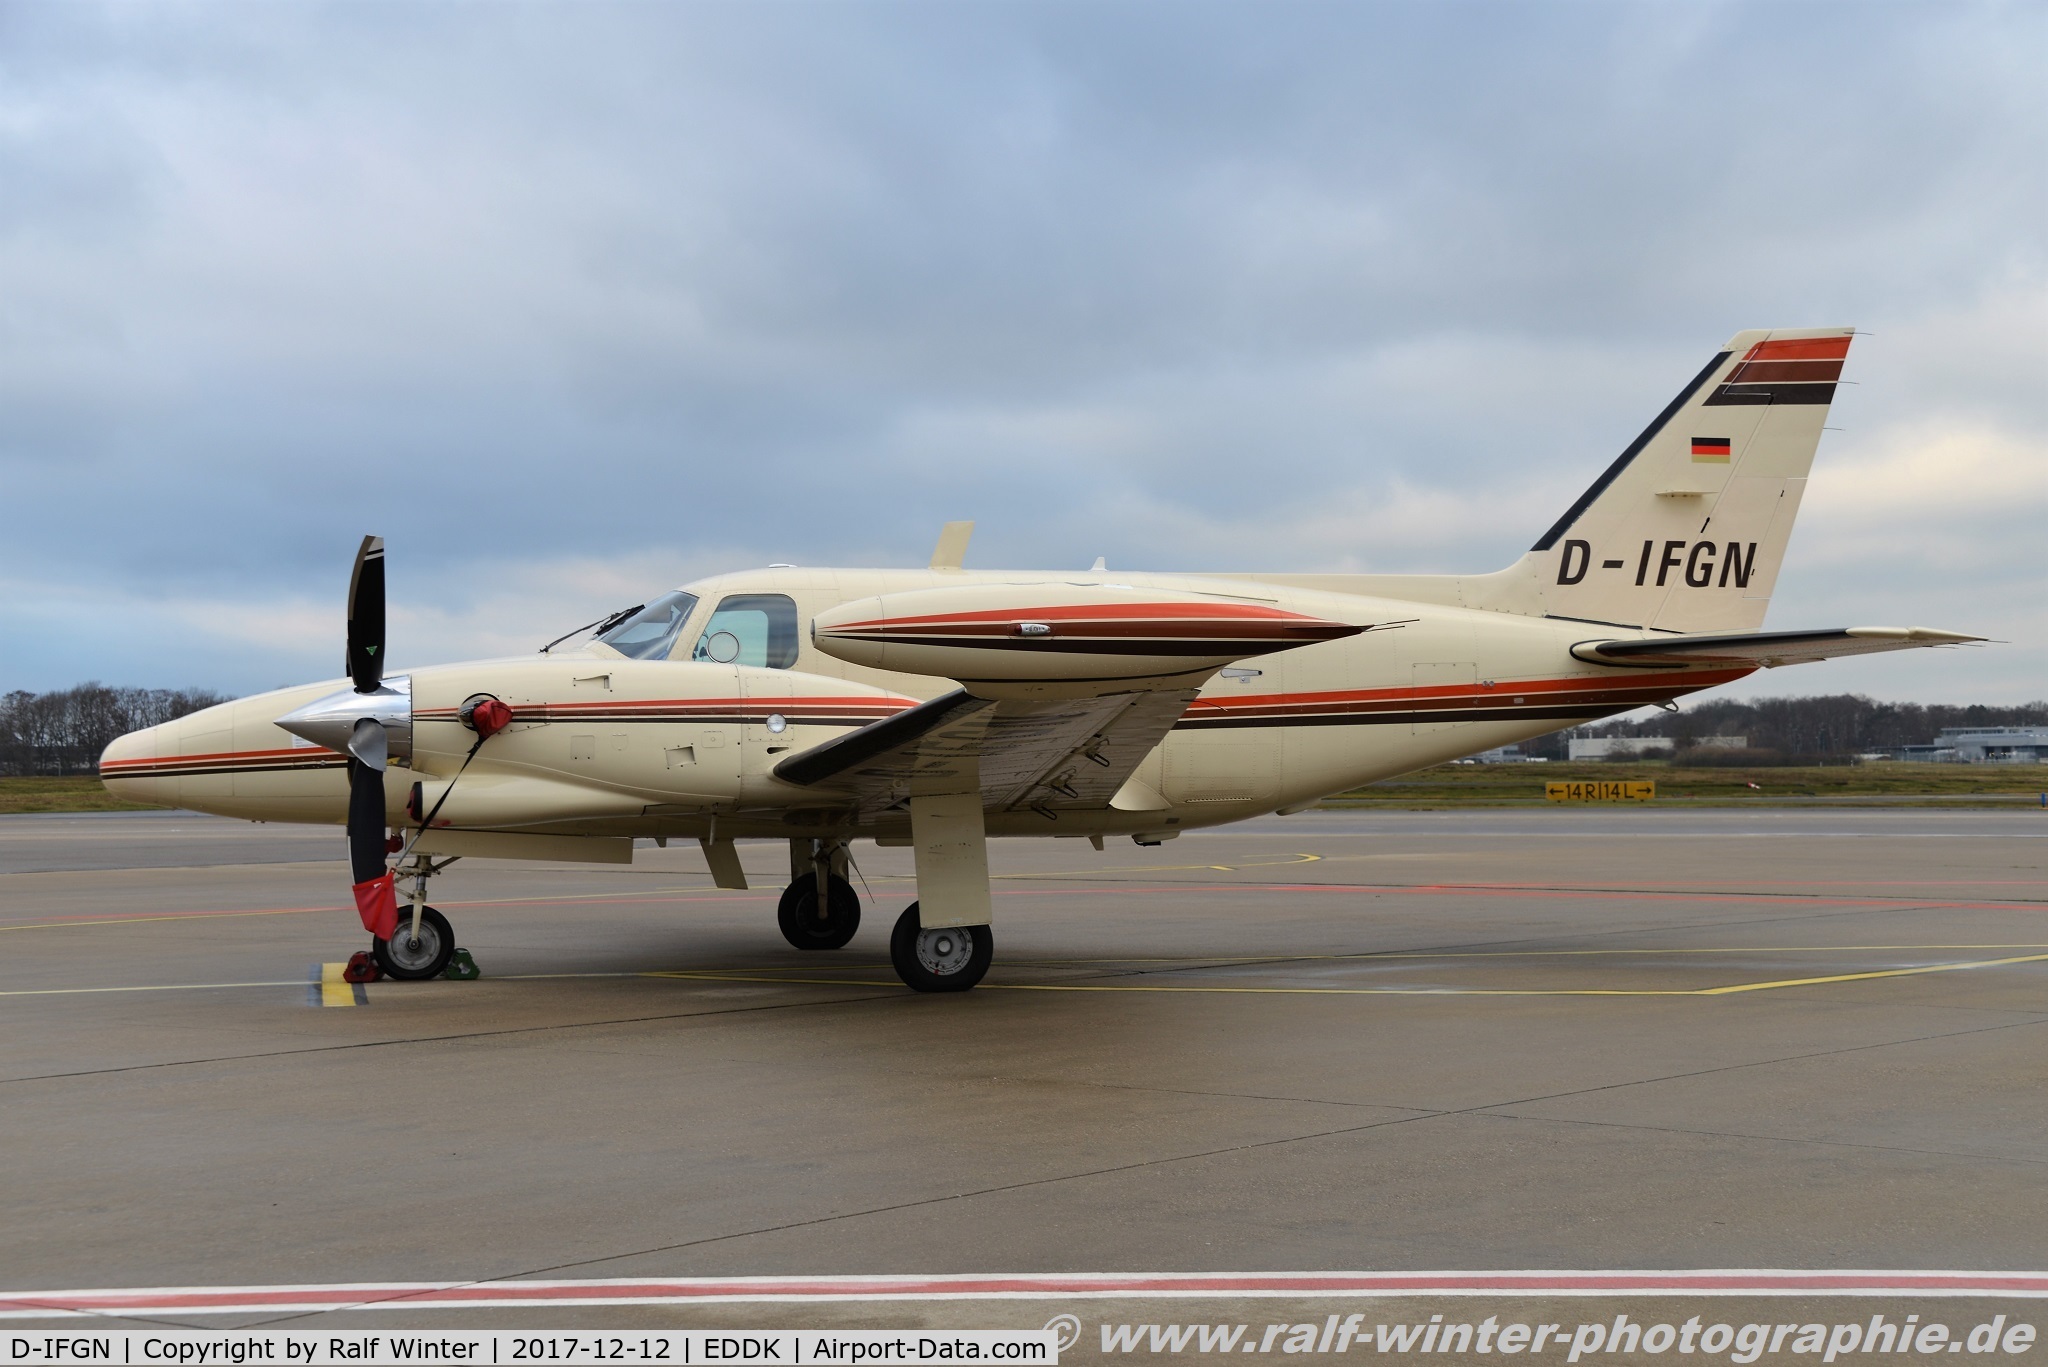 D-IFGN, 1982 Piper PA-31T-620 Cheyenne II C/N 31T-8120052, Piper PA-31T Cheyenne II - Private - 31T-8120052 - D-IFGN - 12.12.2017 - CGN